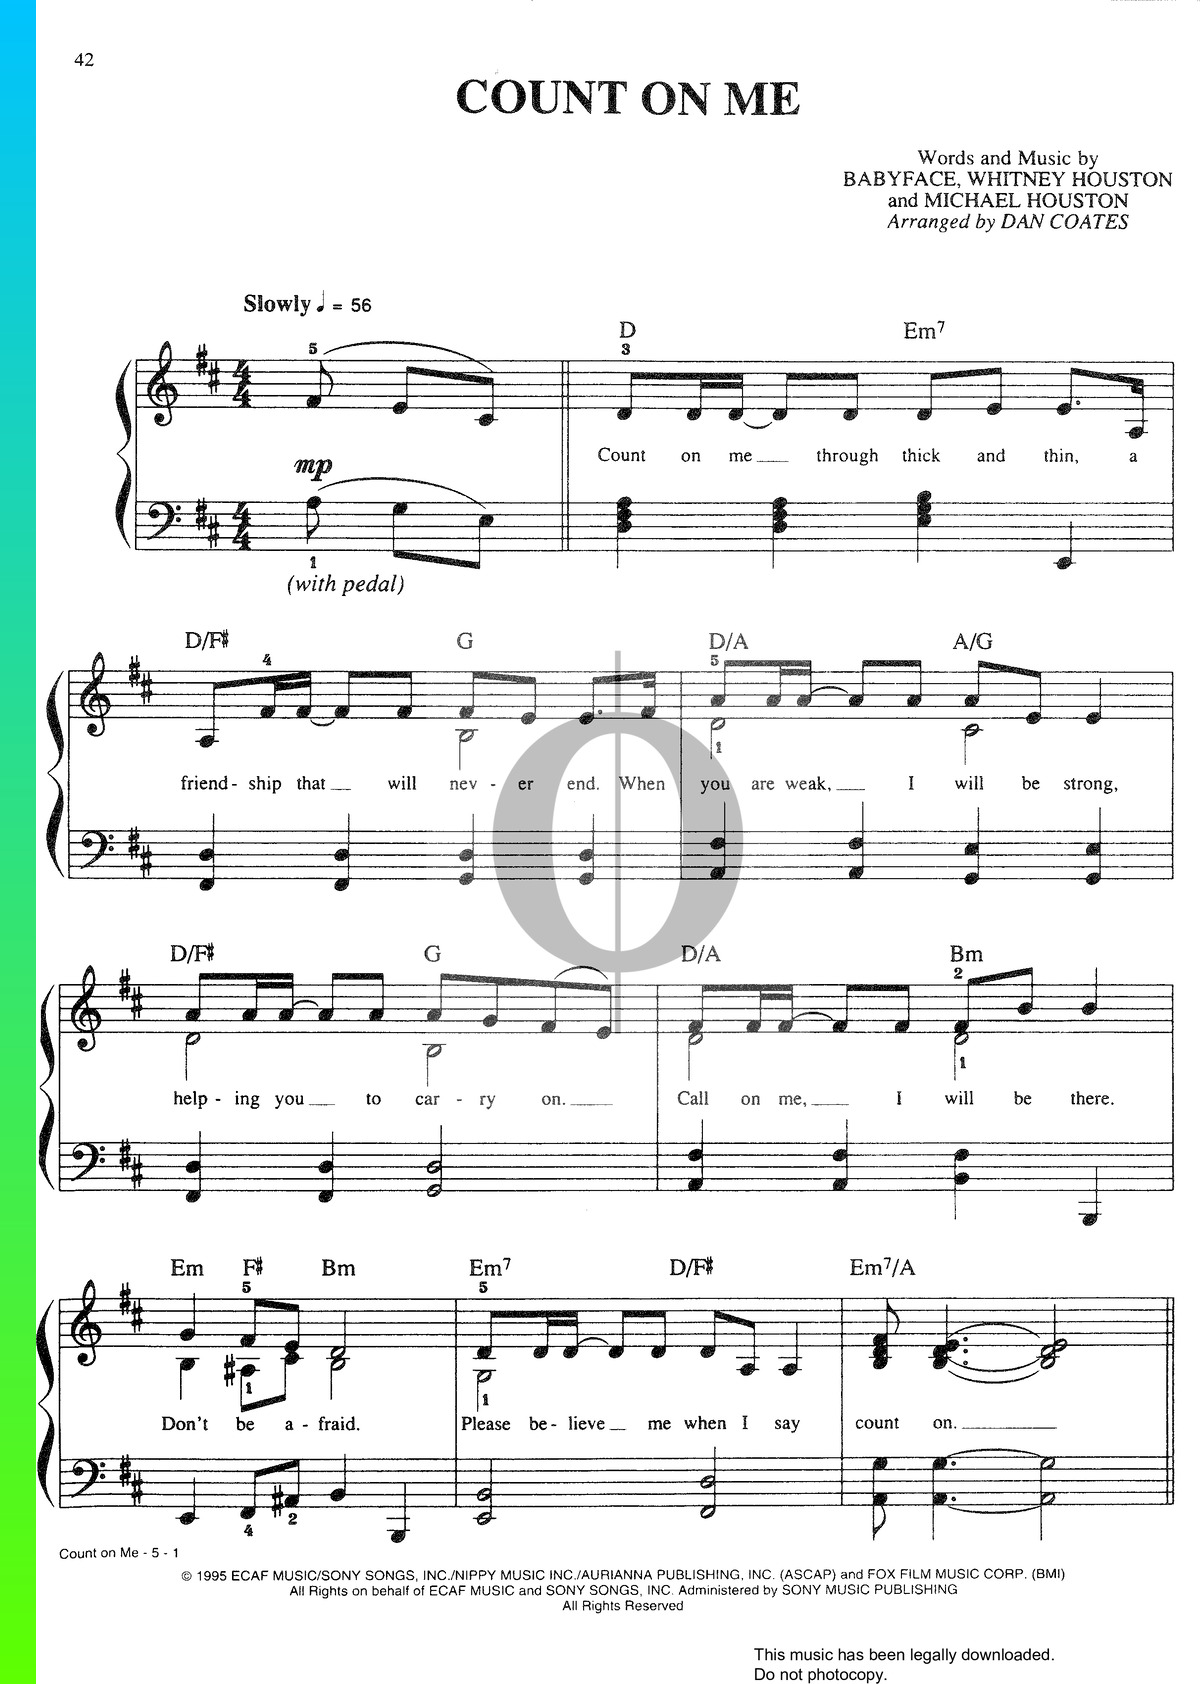 Count On Me Sheet Music From Waiting To Exhale By Whitney Houston Cece Winans Pdf Download Oktav